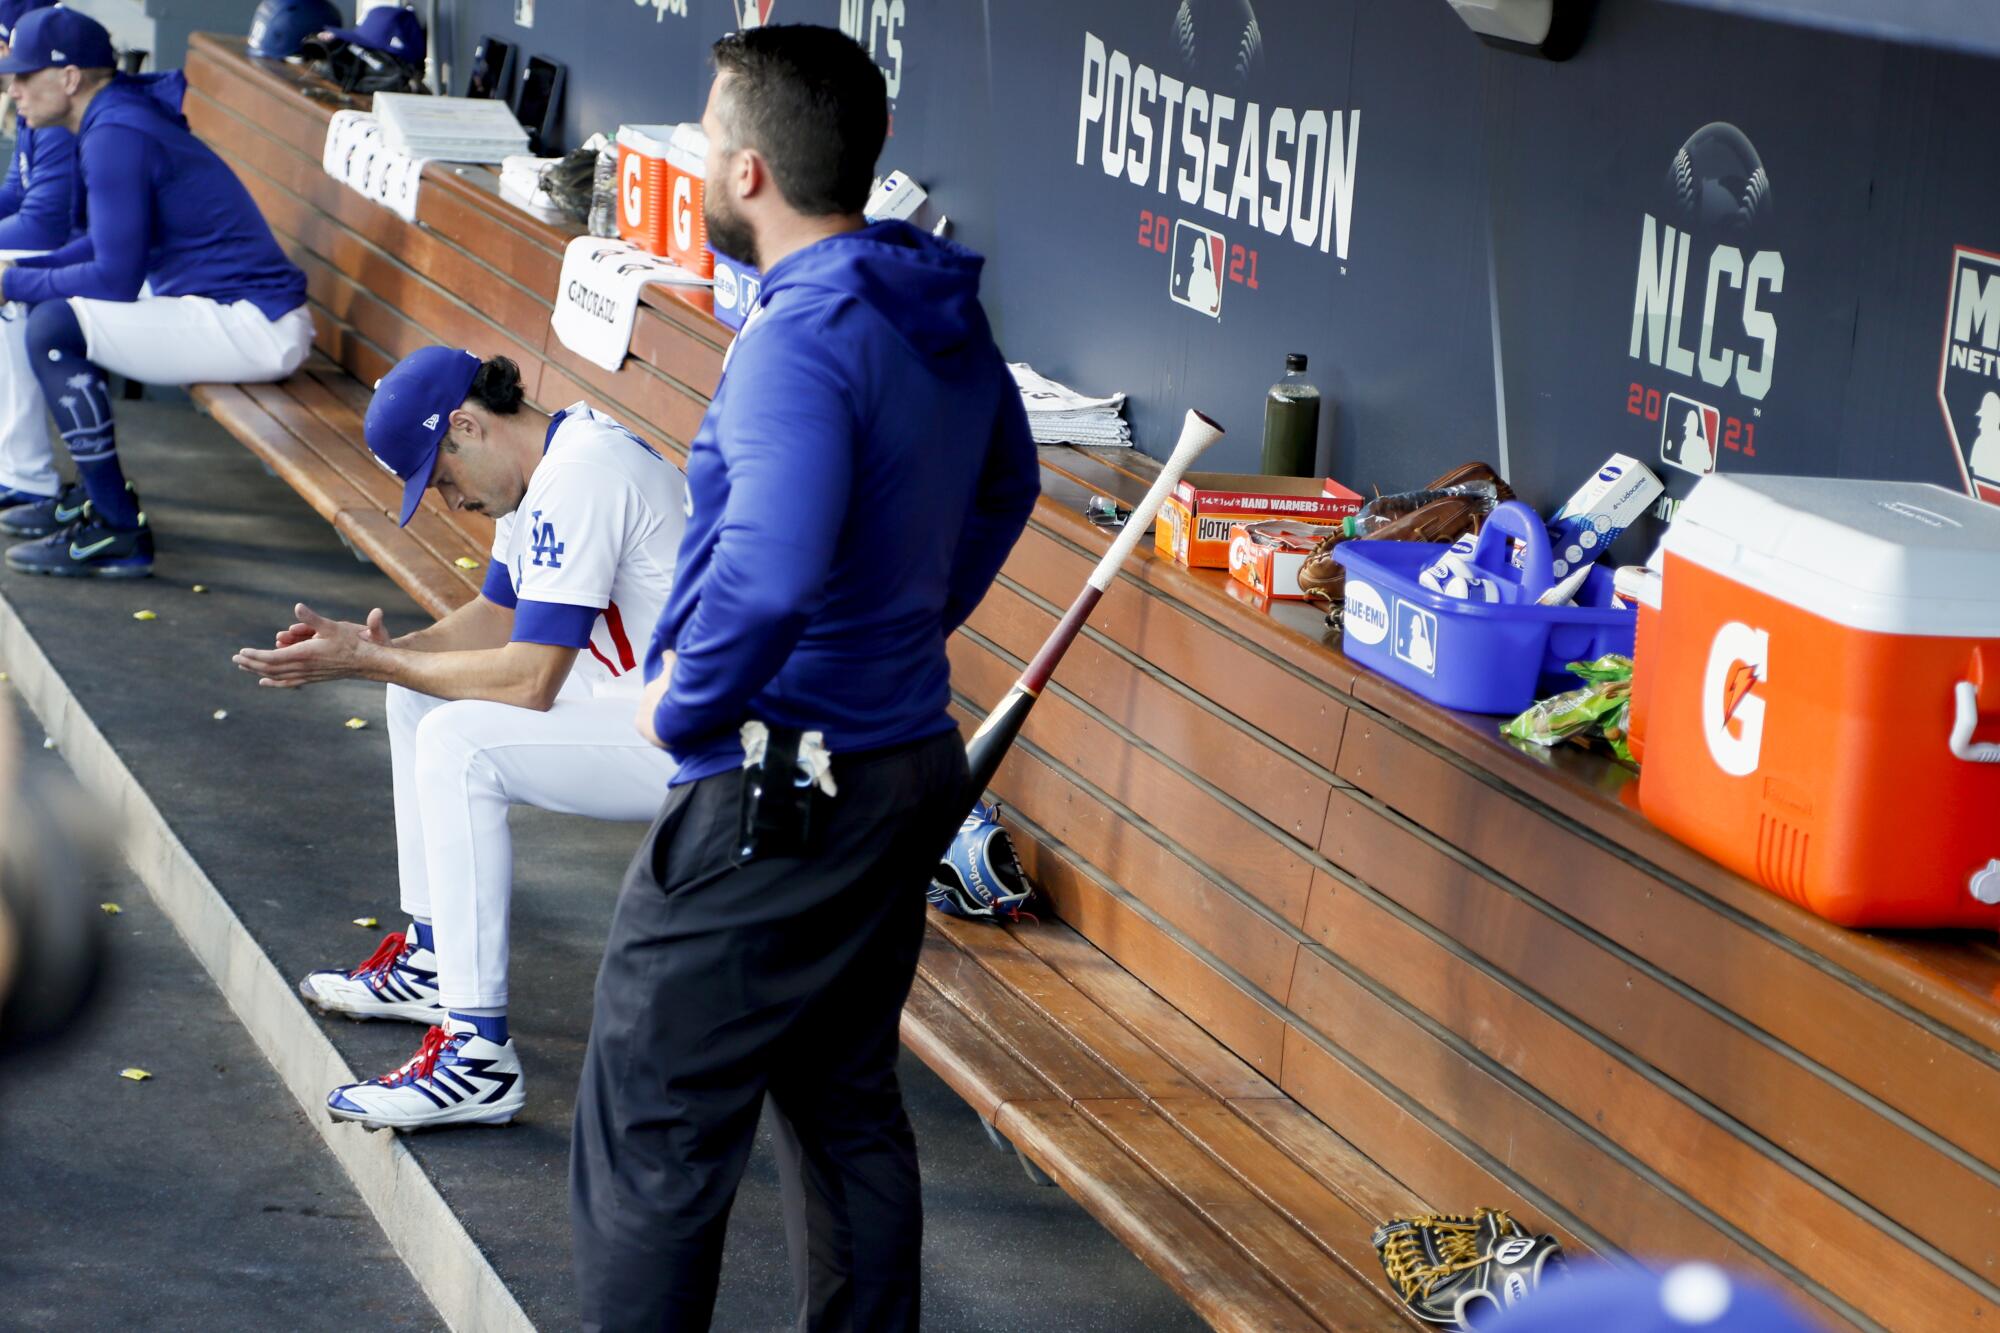  Dodgers starting pitcher Joe Kelly sits in the dugout after being taken out.